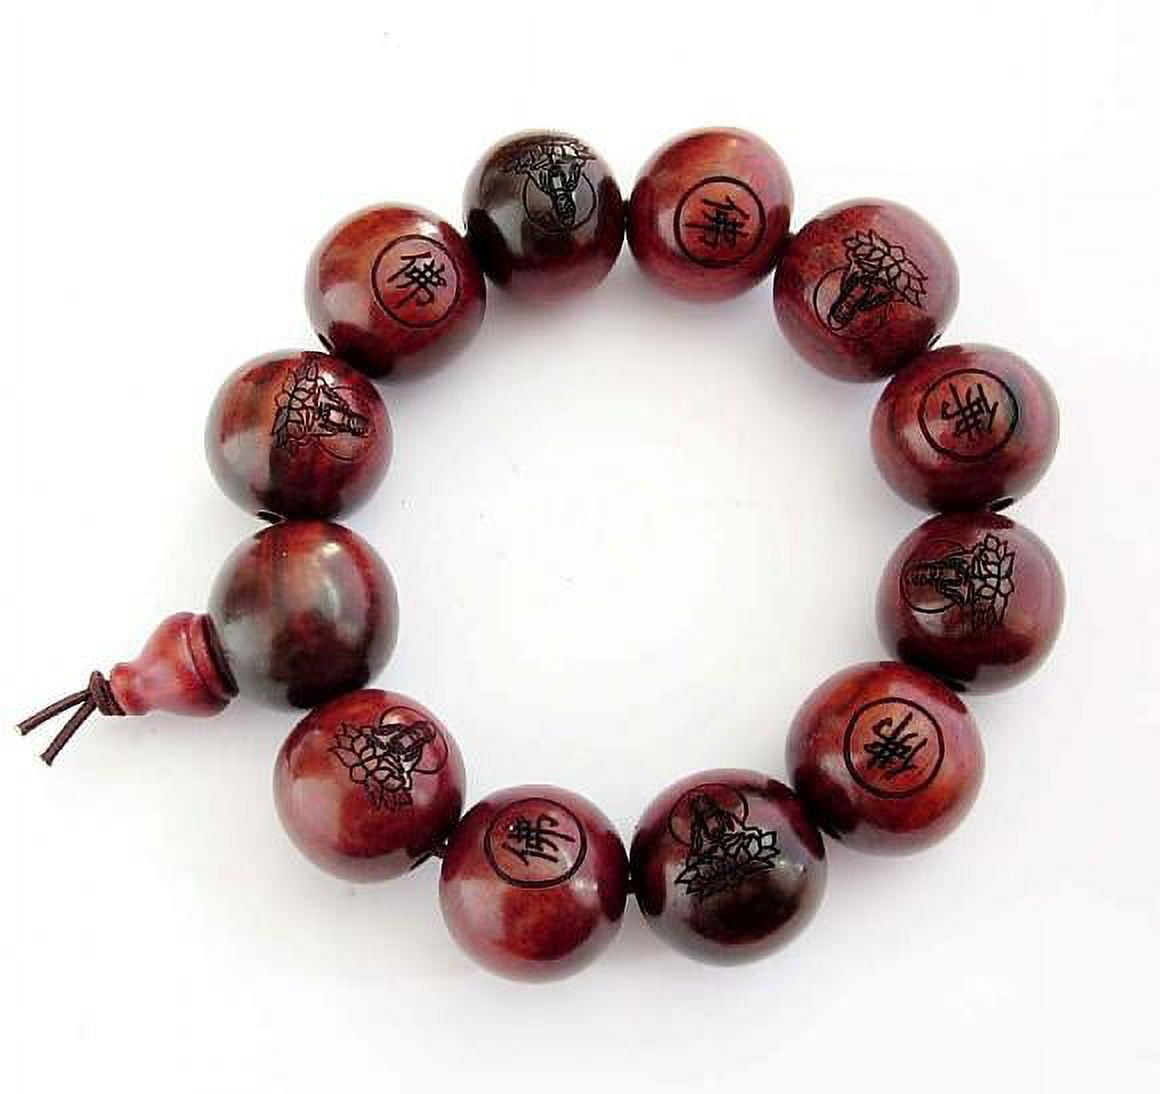 What Are Mala Beads & Why Are They Used?